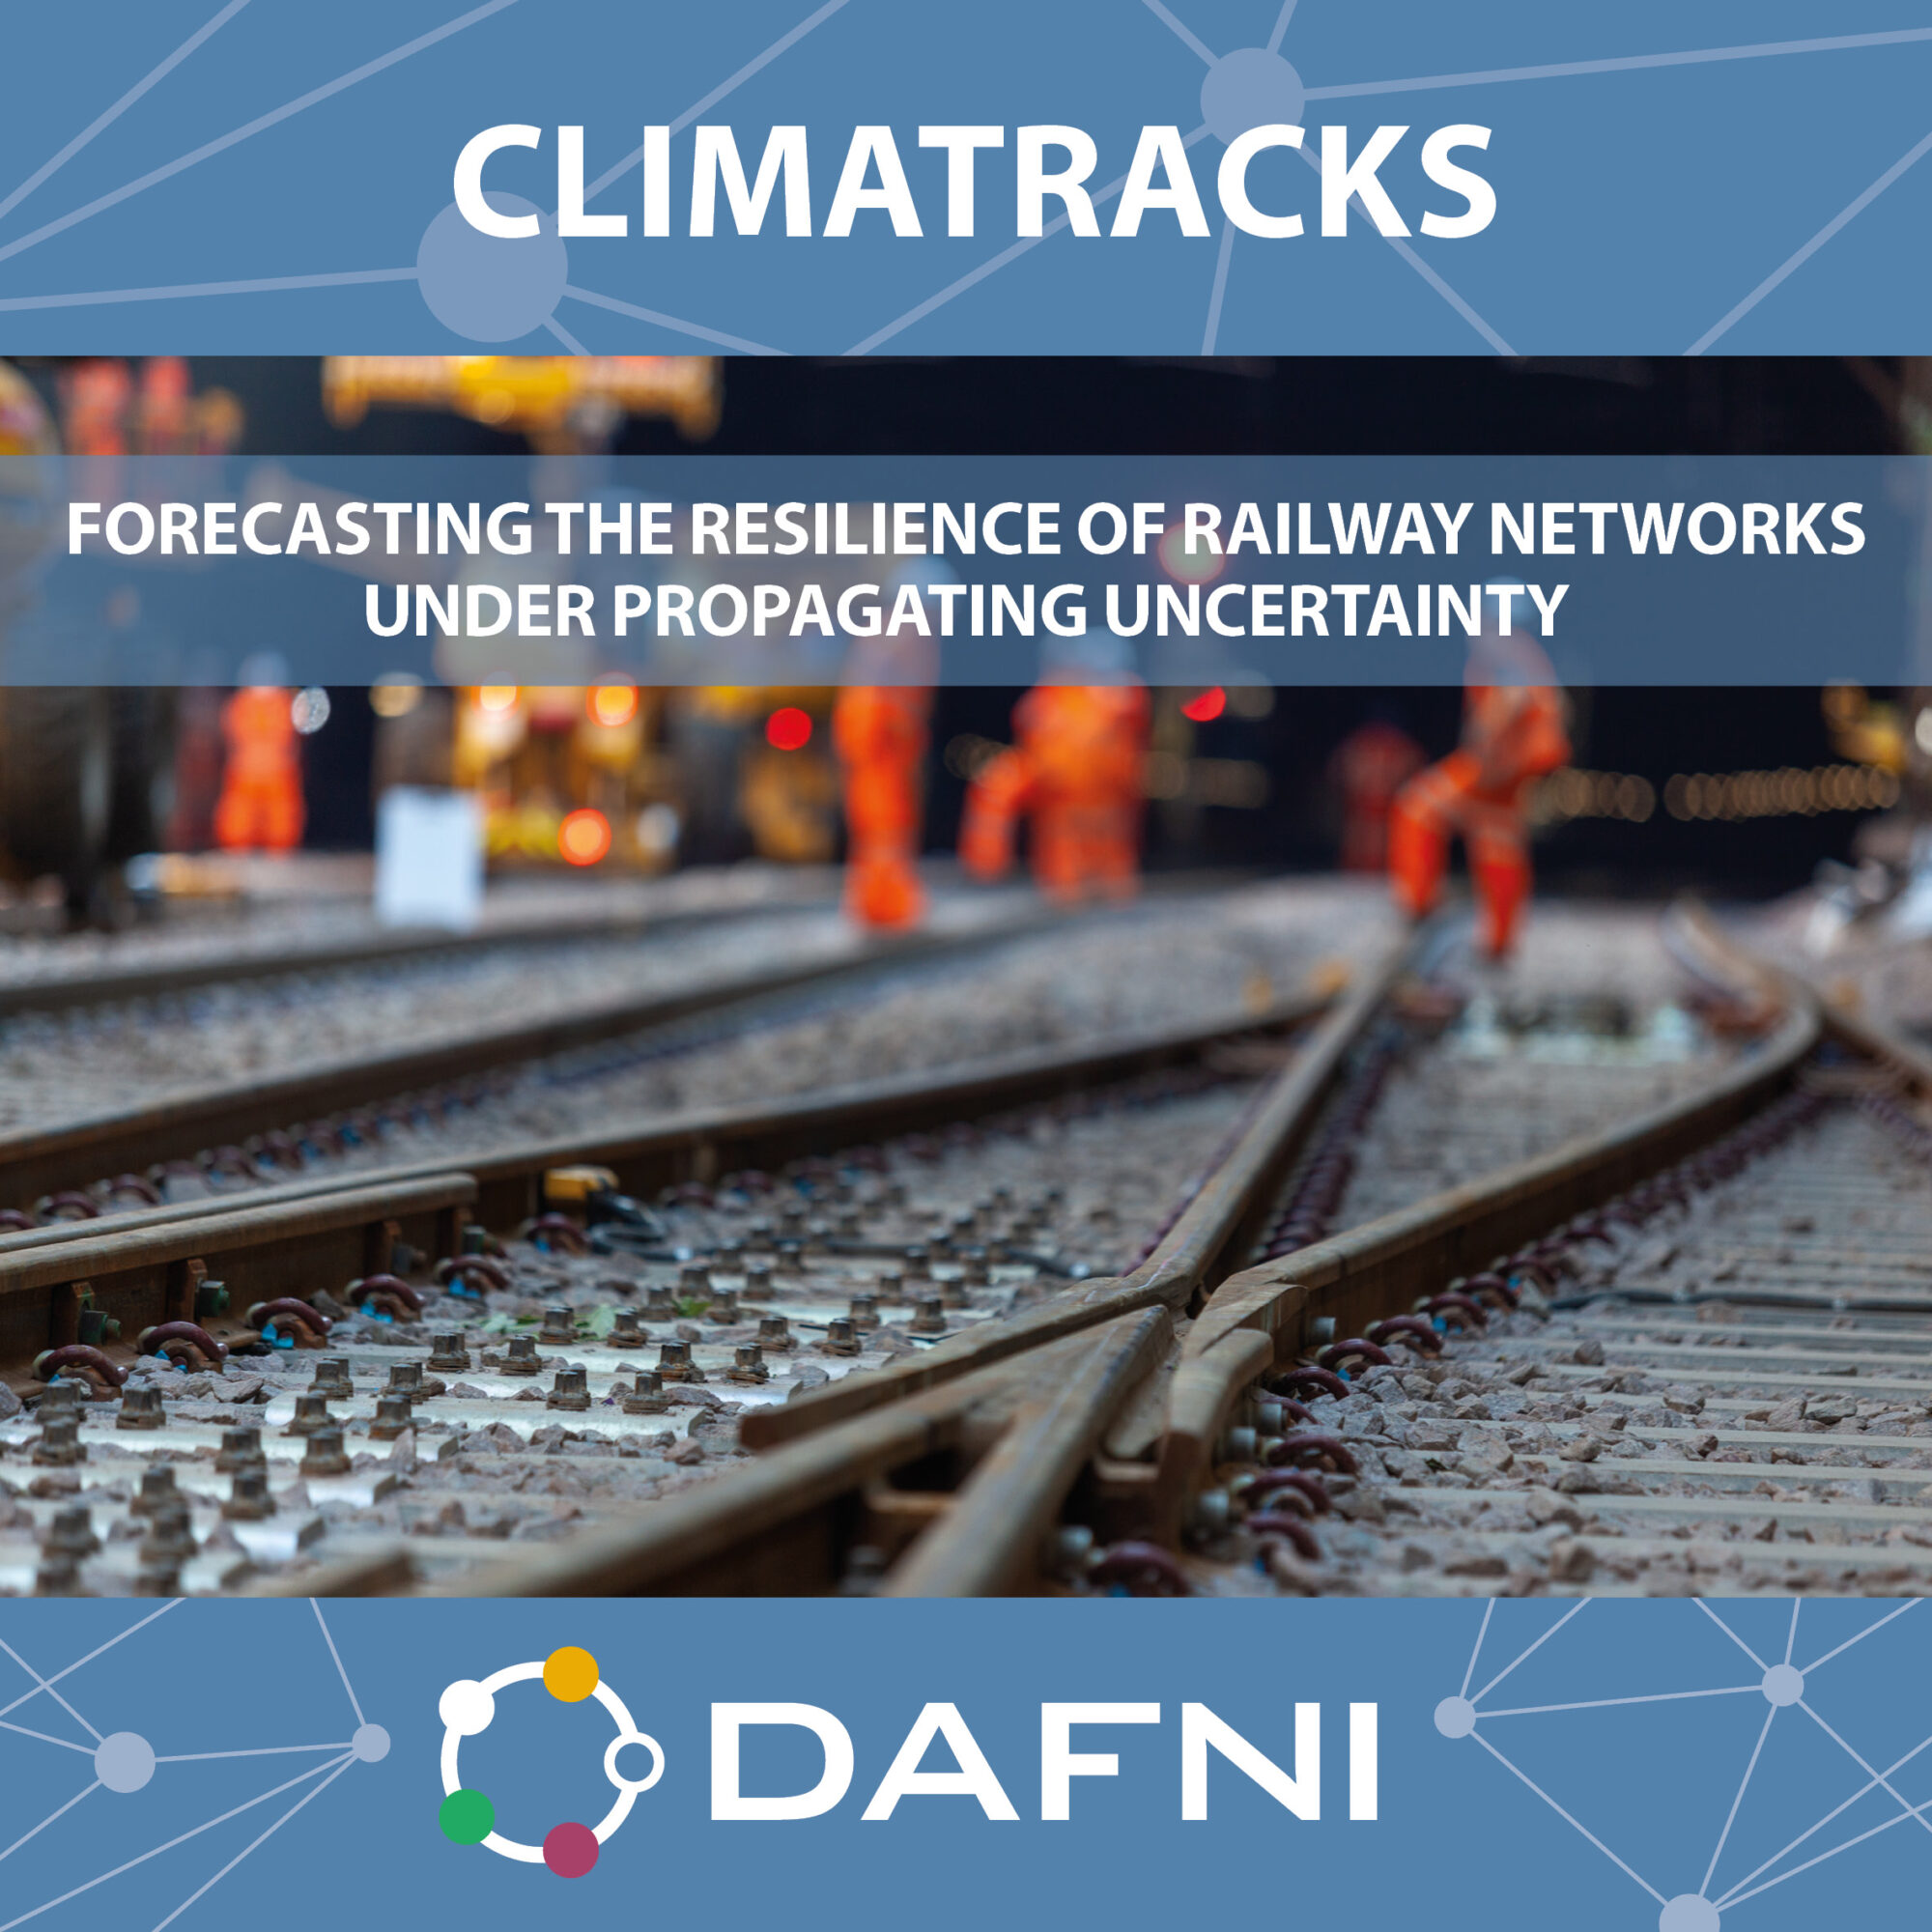 ClimaTracks Forecasting the resilience of railway network under propagating uncertainty